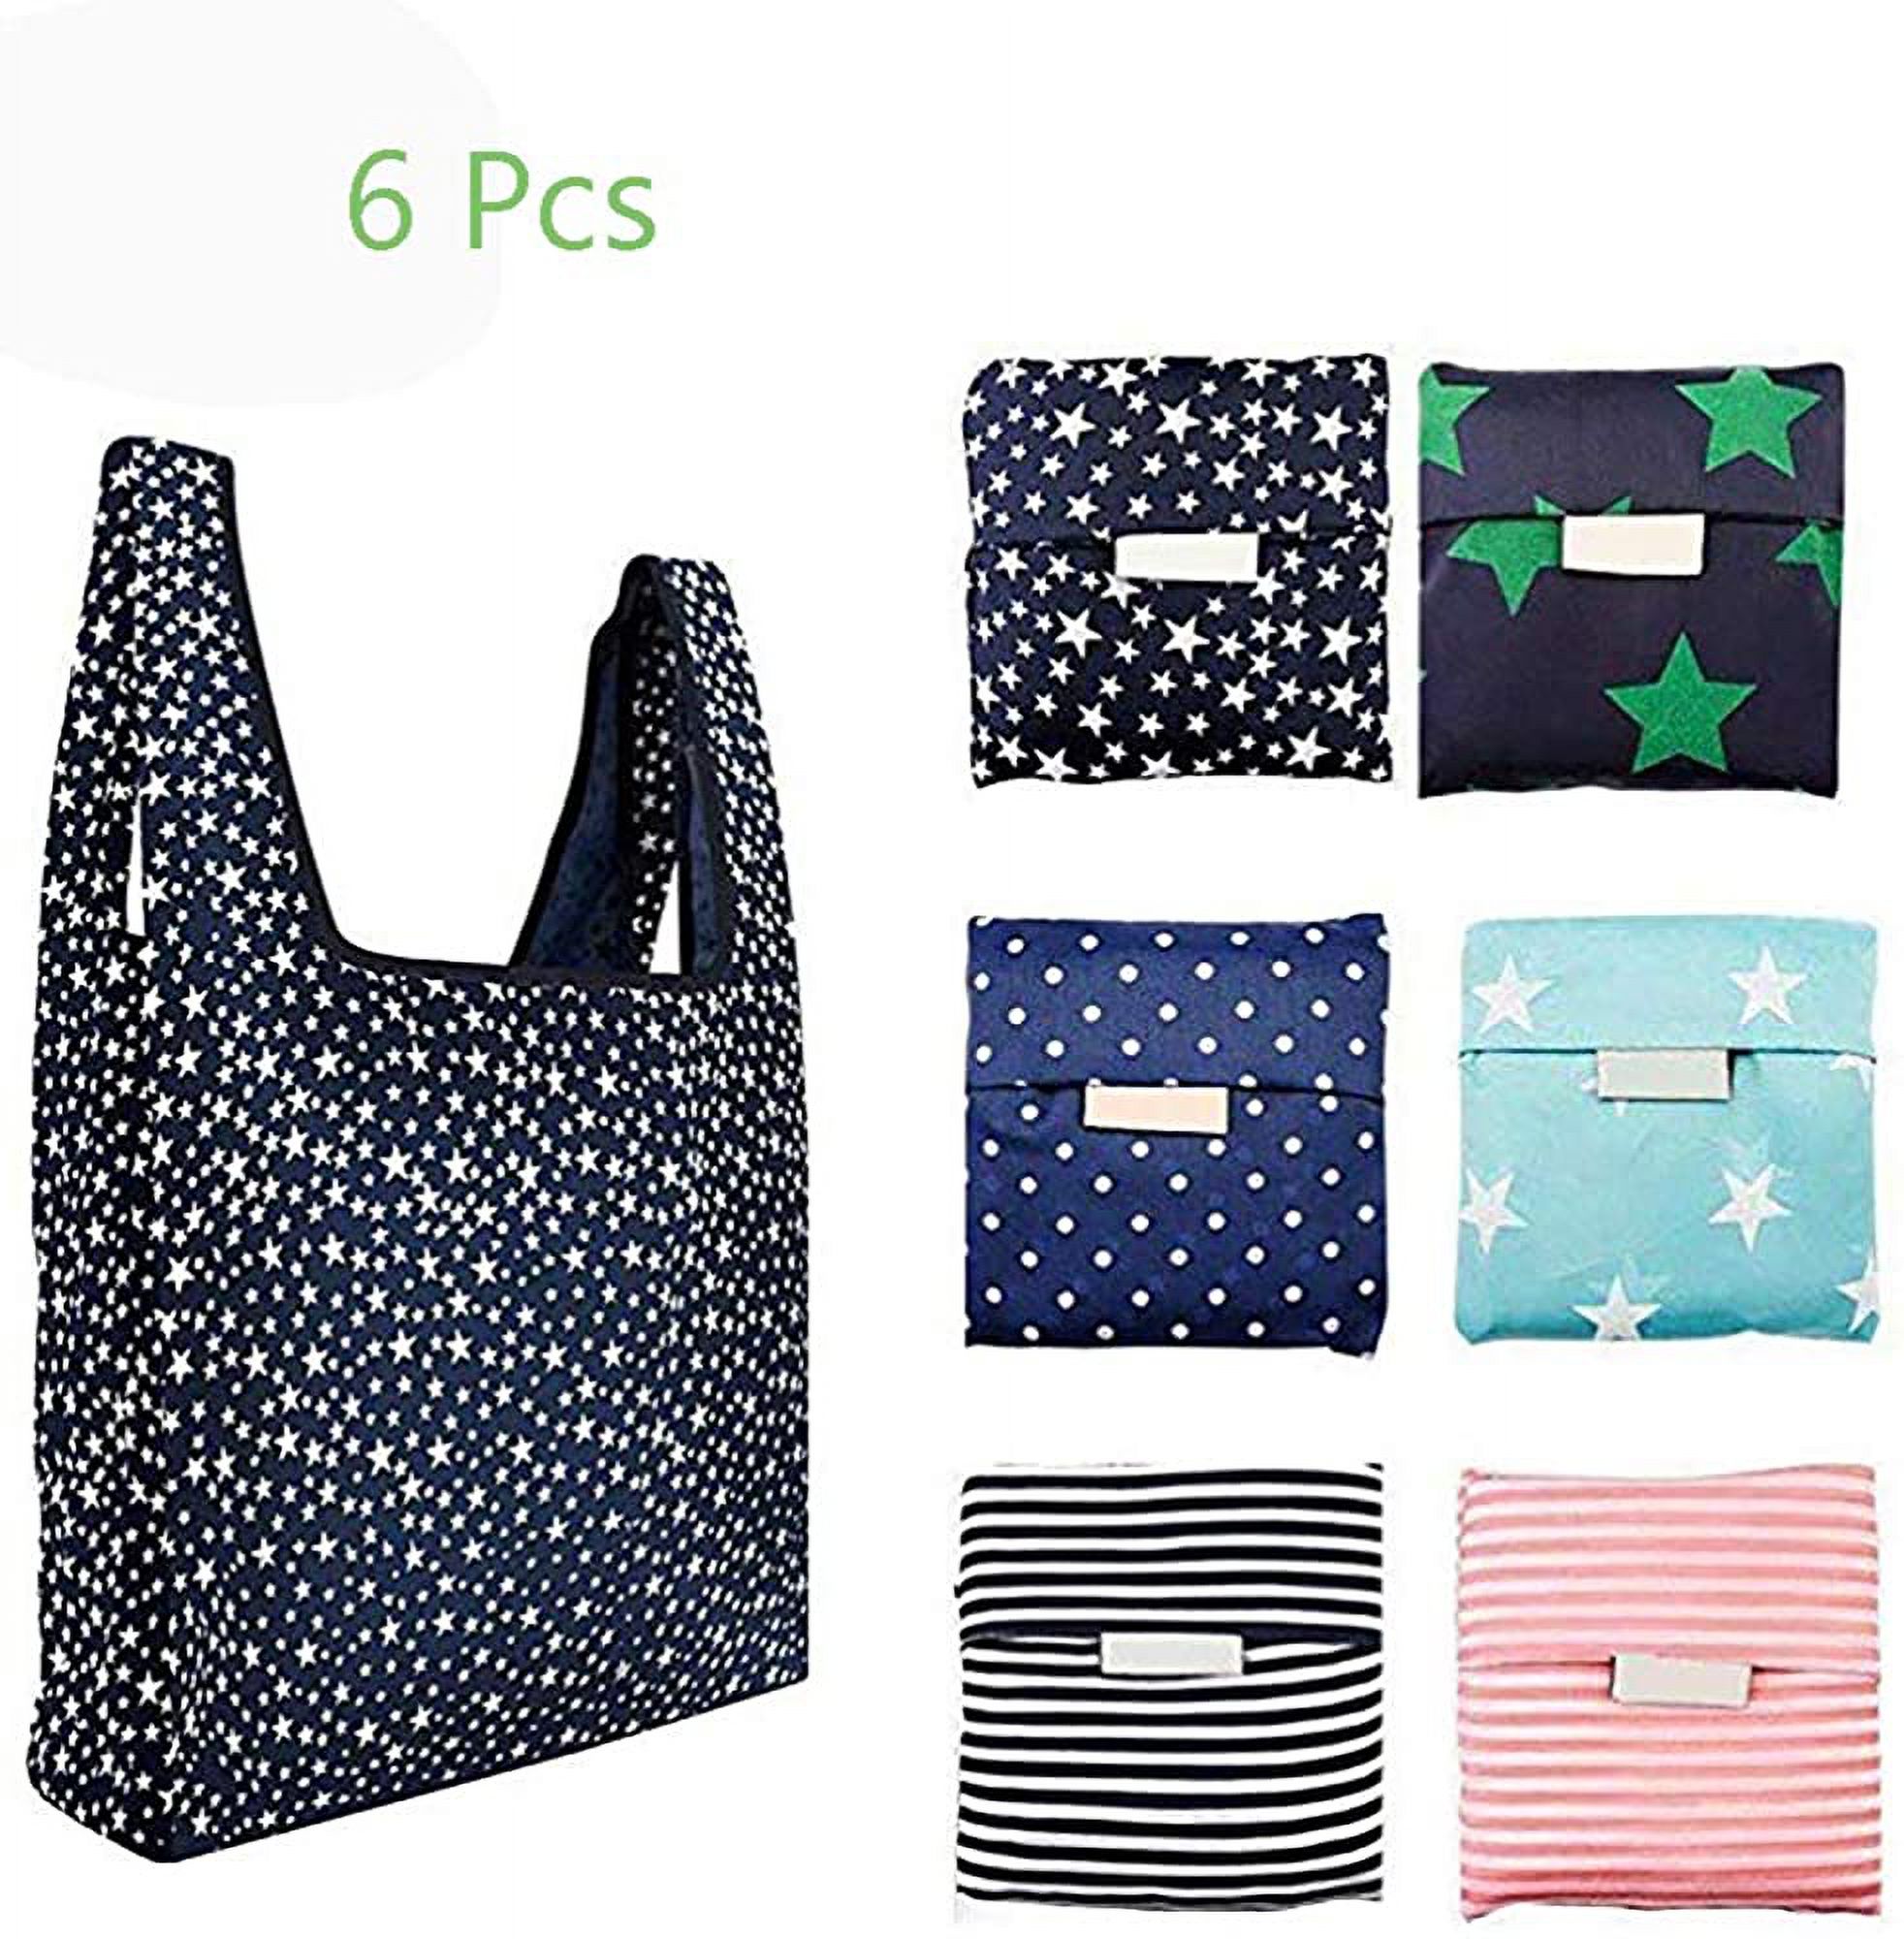 Miumaeov 6Pcs Grocery Bags Reusable Colorful Foldable Shopping Bags Washable Lightweight Tote Bags - image 3 of 6